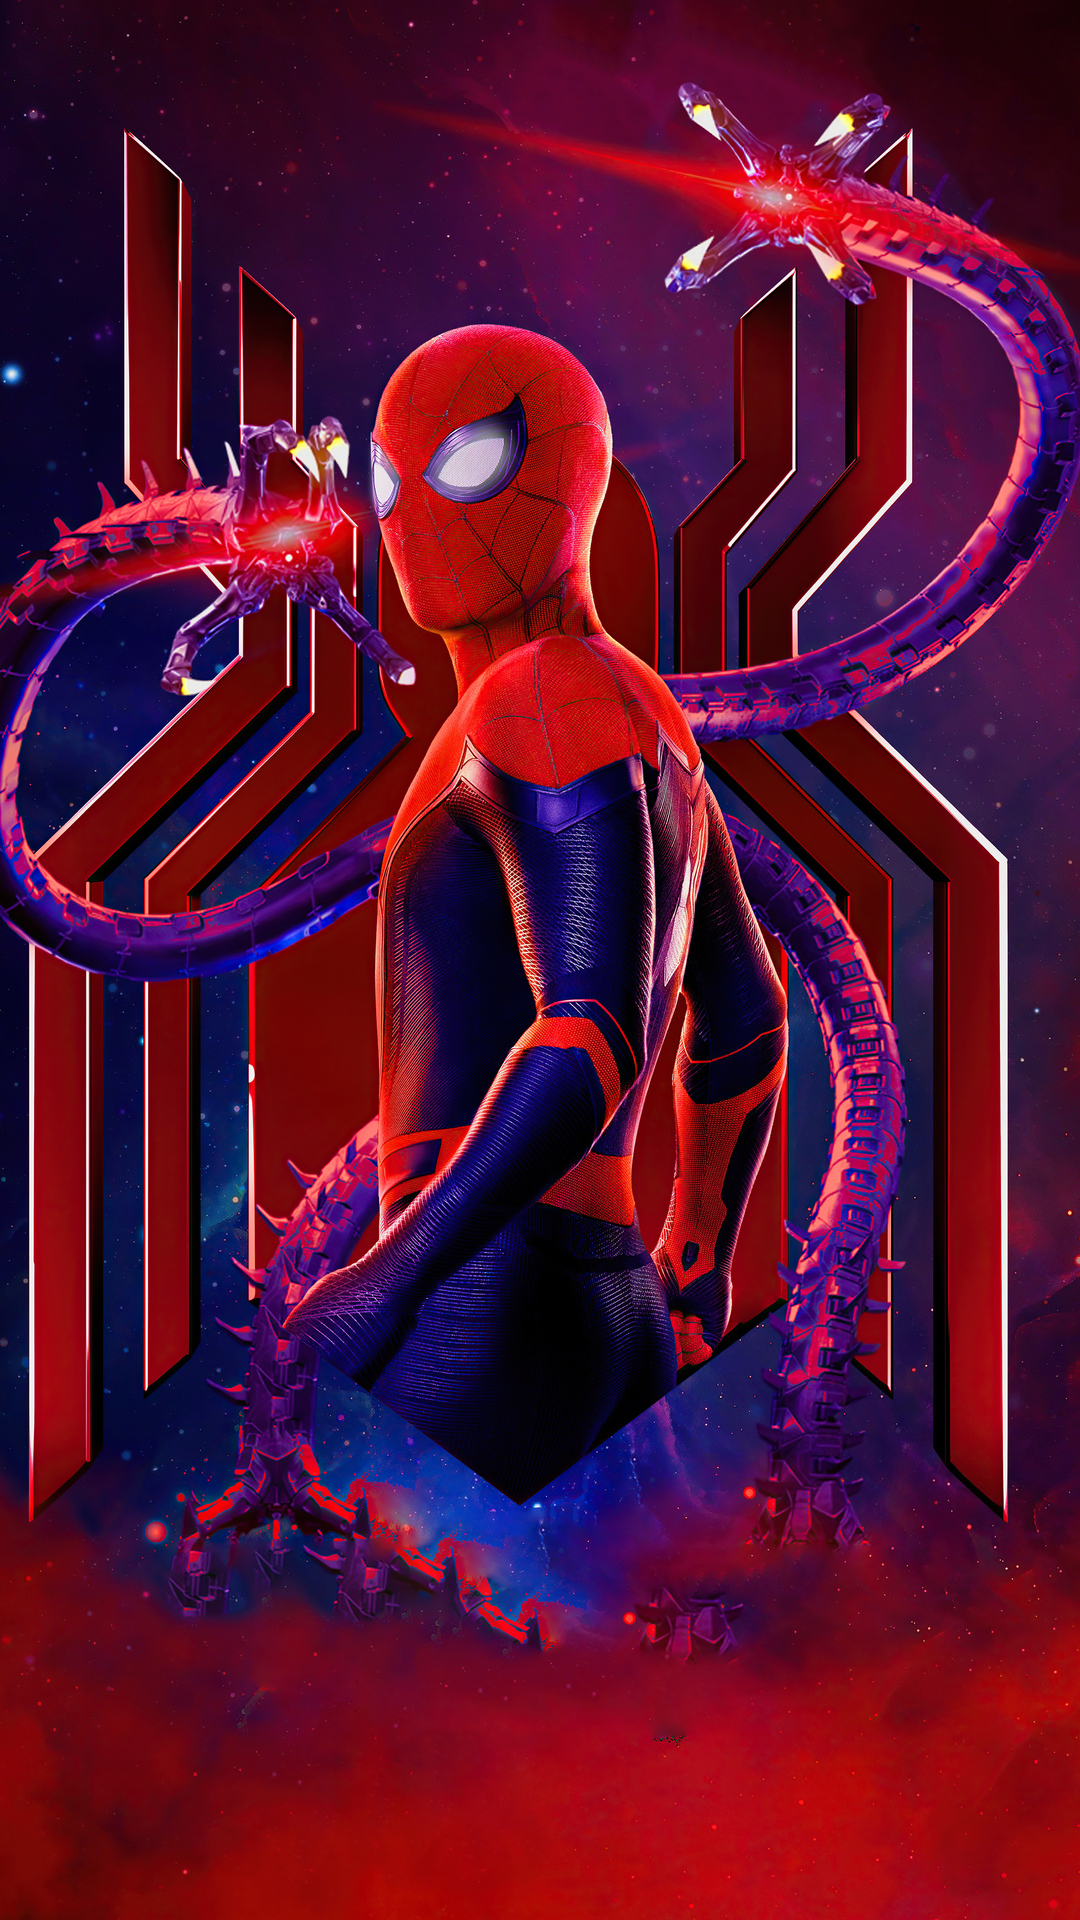 1080x1920 Spiderman No Way Home Movie Poster 5k Iphone 7